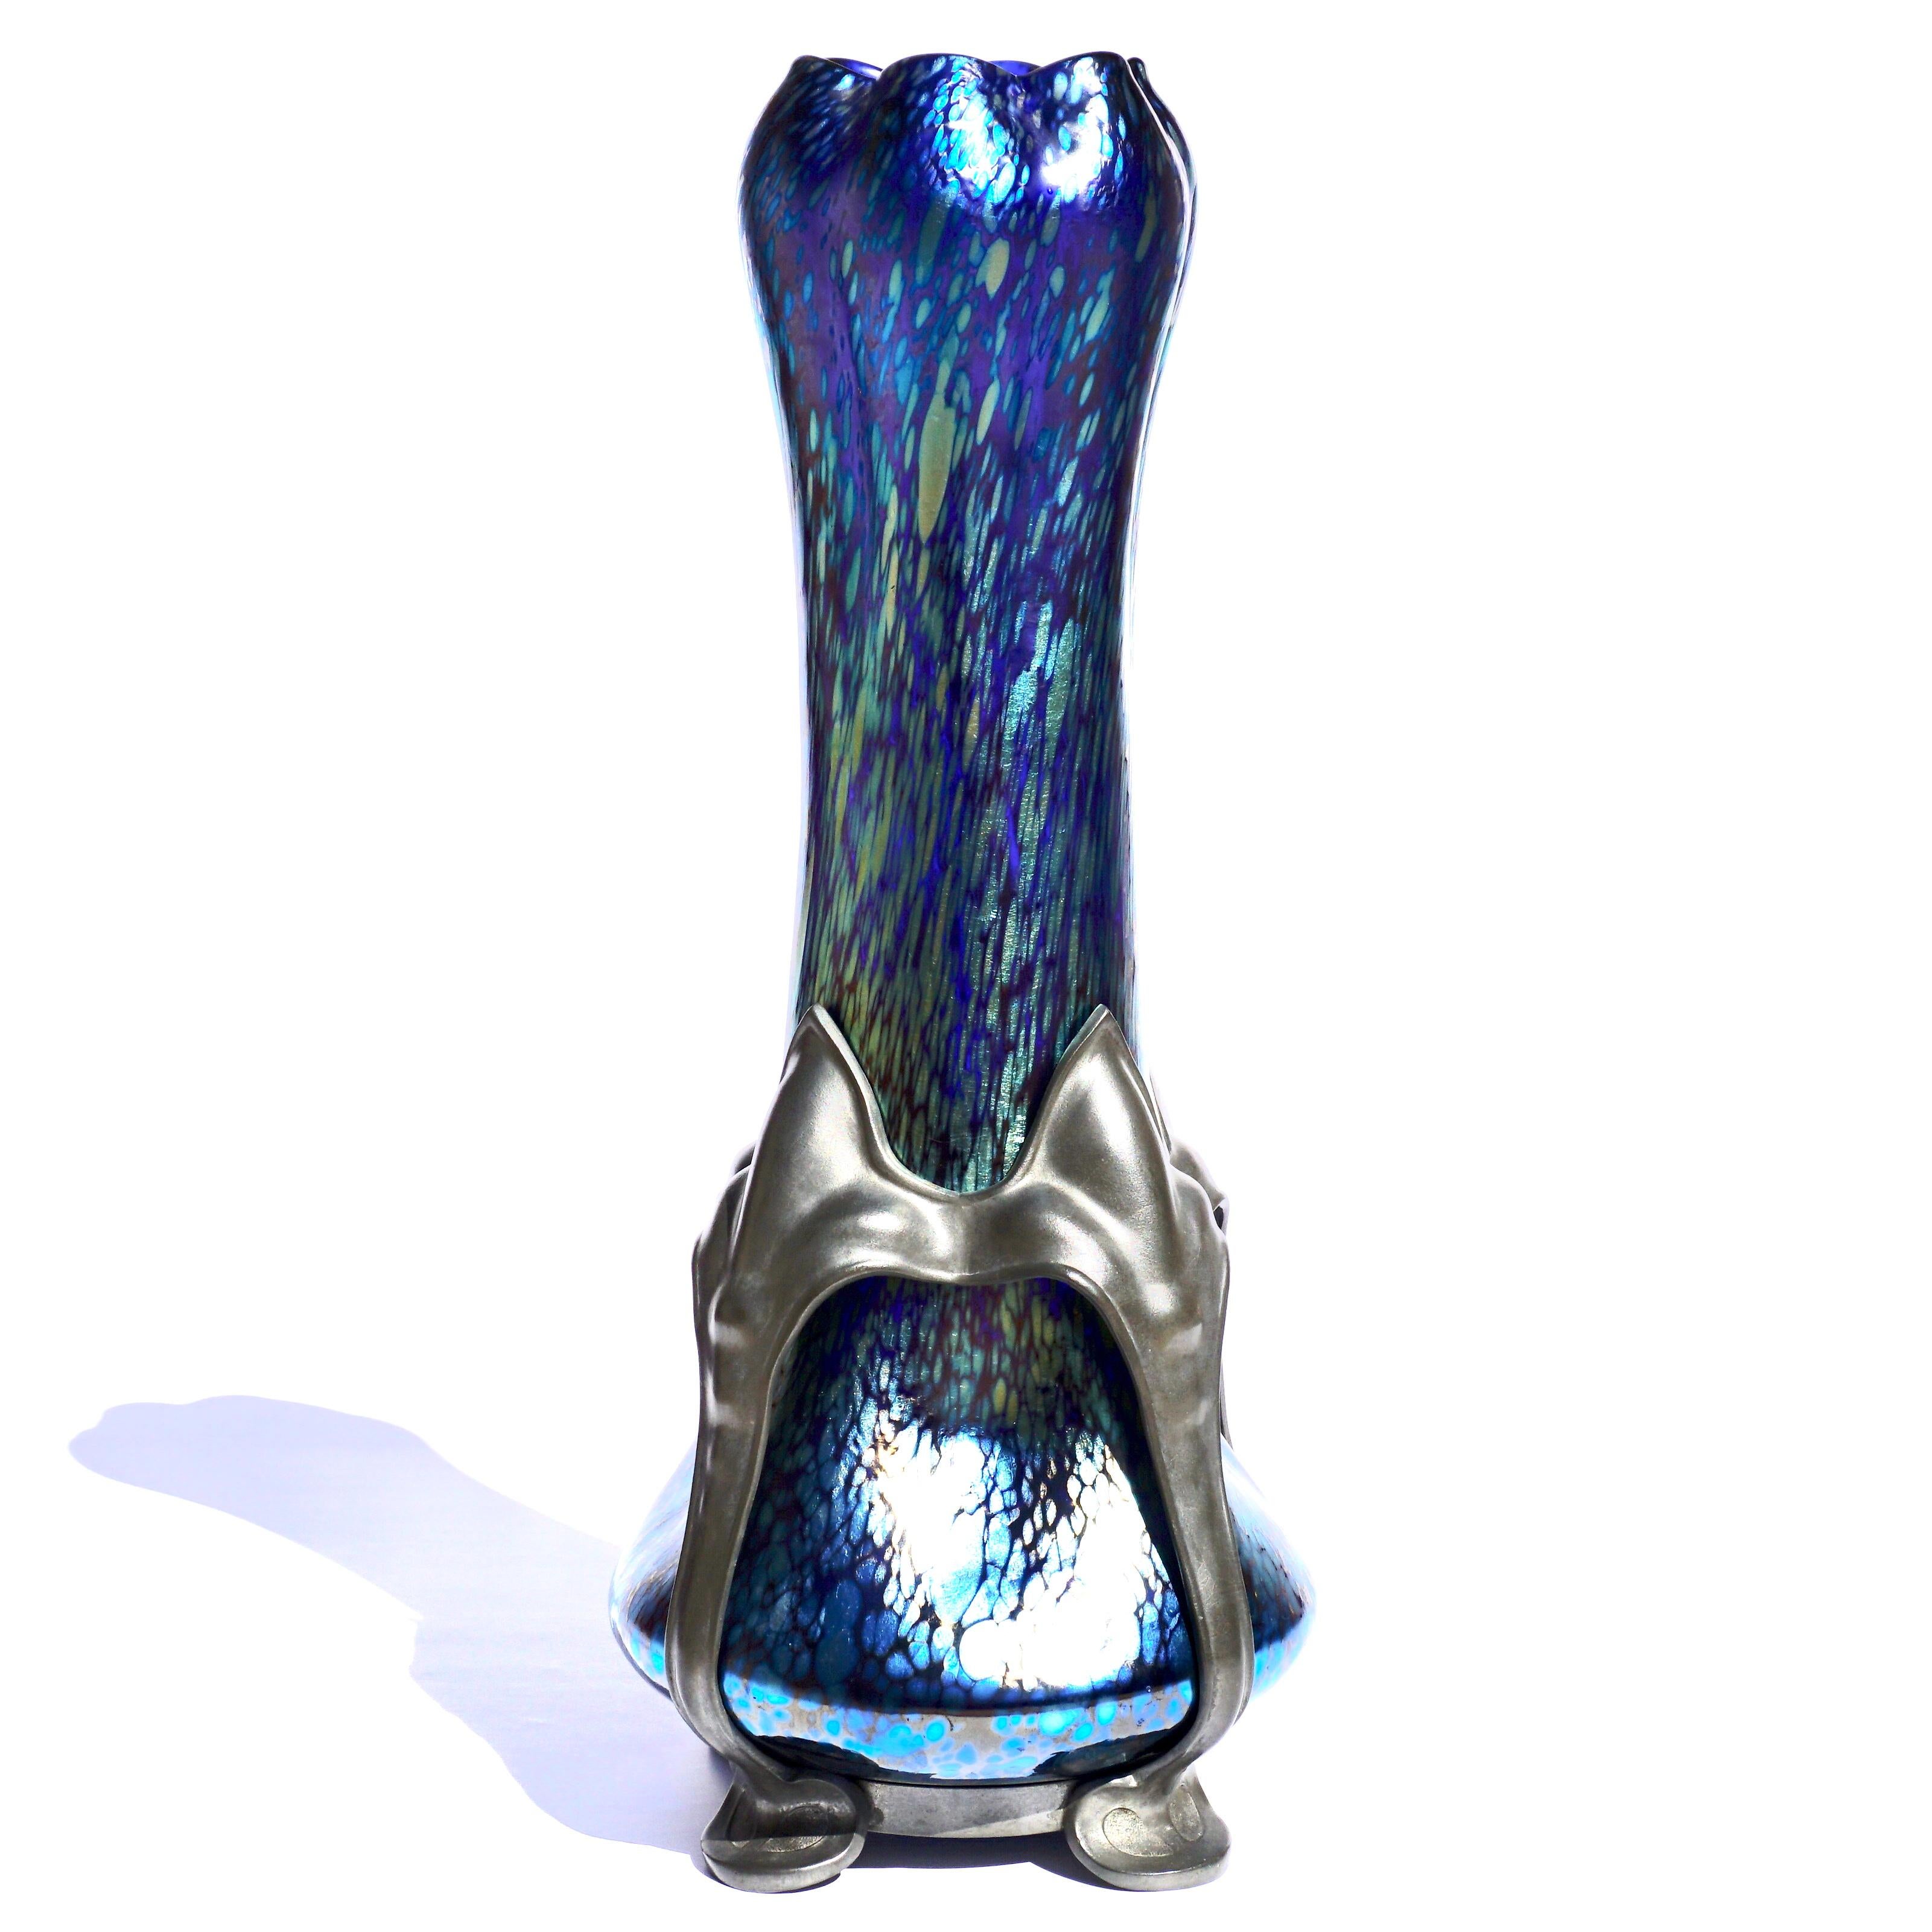 A Loetz Cobalt Papillon Art Glass and Pewter Art Nouveau Vase. Circa 1900

The shapely design with flared base having four evenly spaced indentations below sloping sides rising to a swollen top crimped into six lobes, all finished in blue